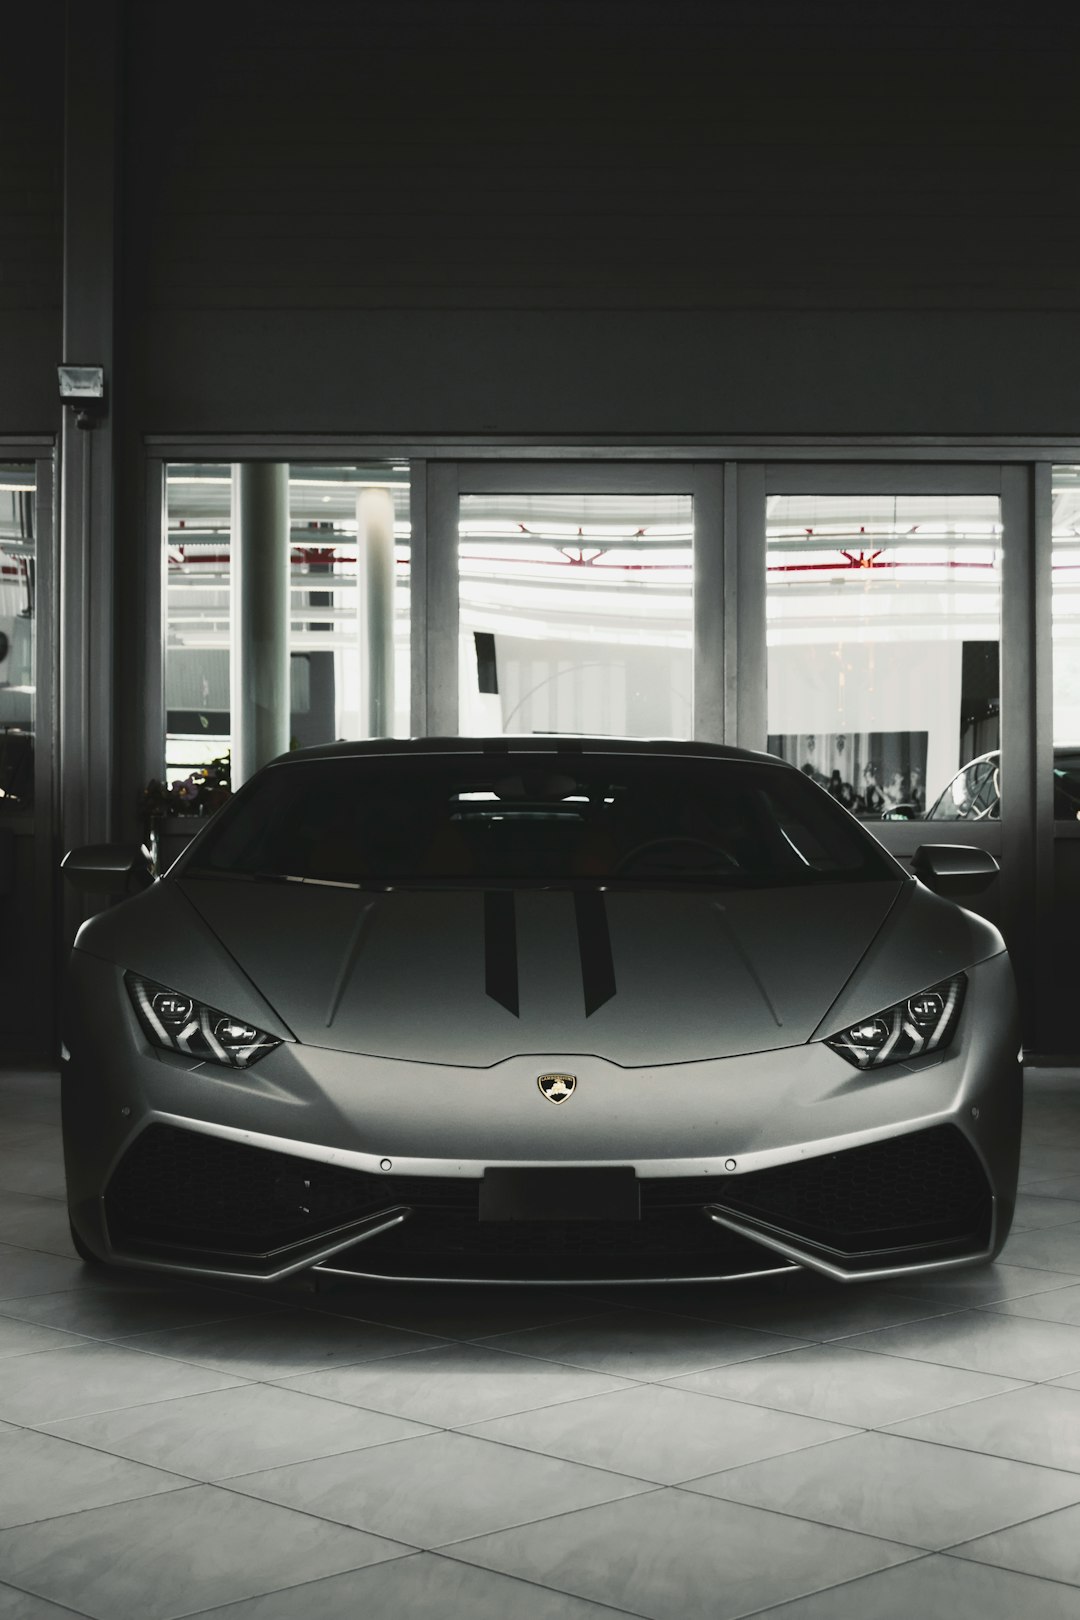 Lamborghini is an Italian luxury sports car manufacturer. It is known for producing high-performance vehicles that are synonymous with luxury, speed, and style. Some of their popular models include the Aventador, Huracán, and Urus.